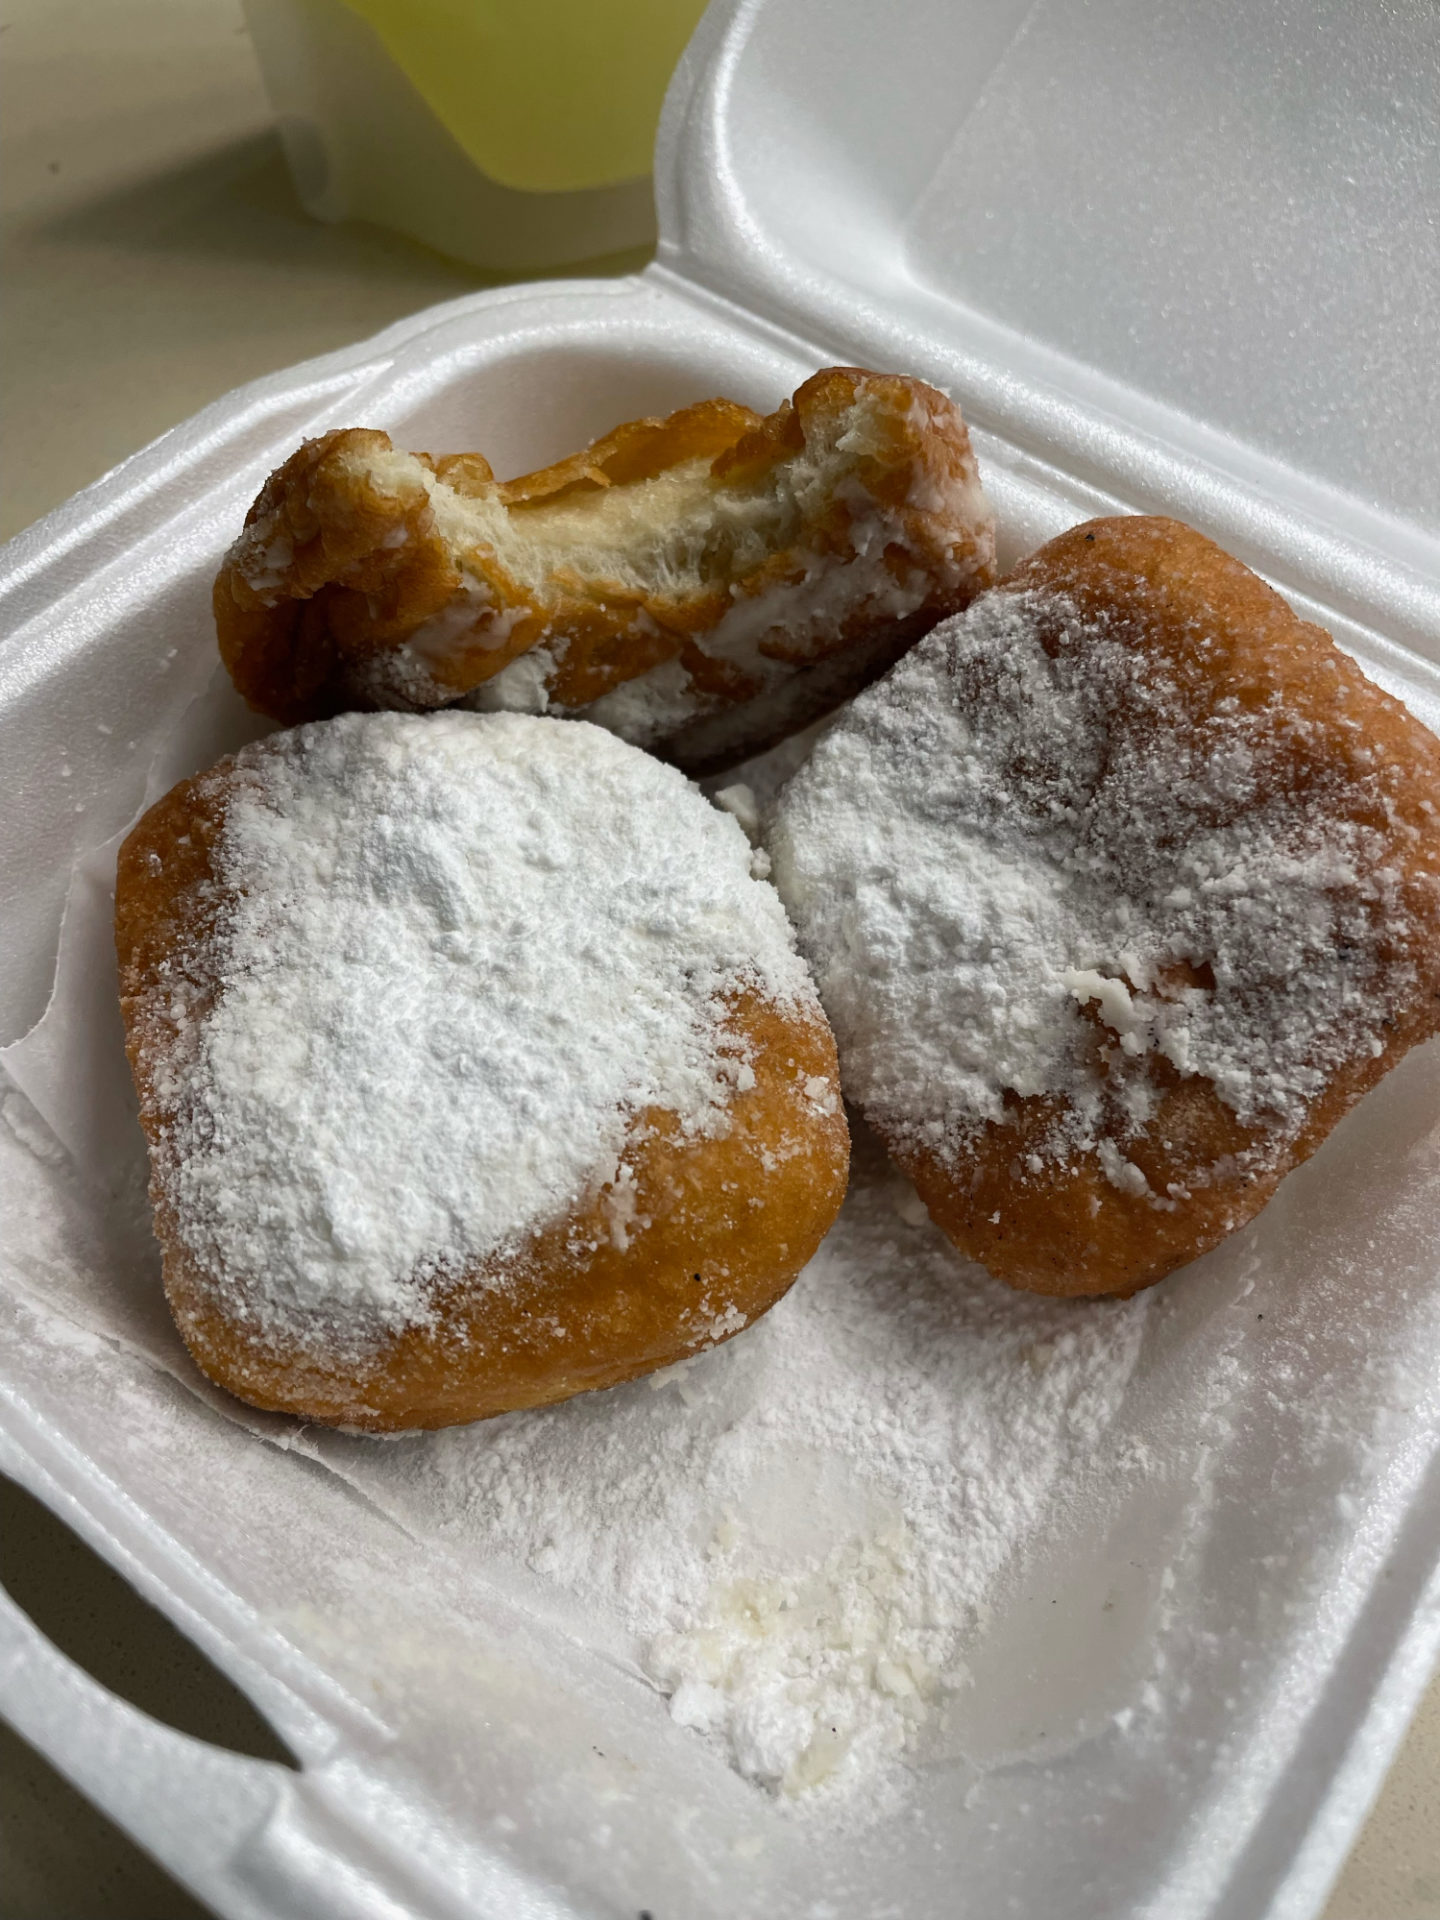 Three beignets in a white styrofoam box, and one of them has a bite out of it.